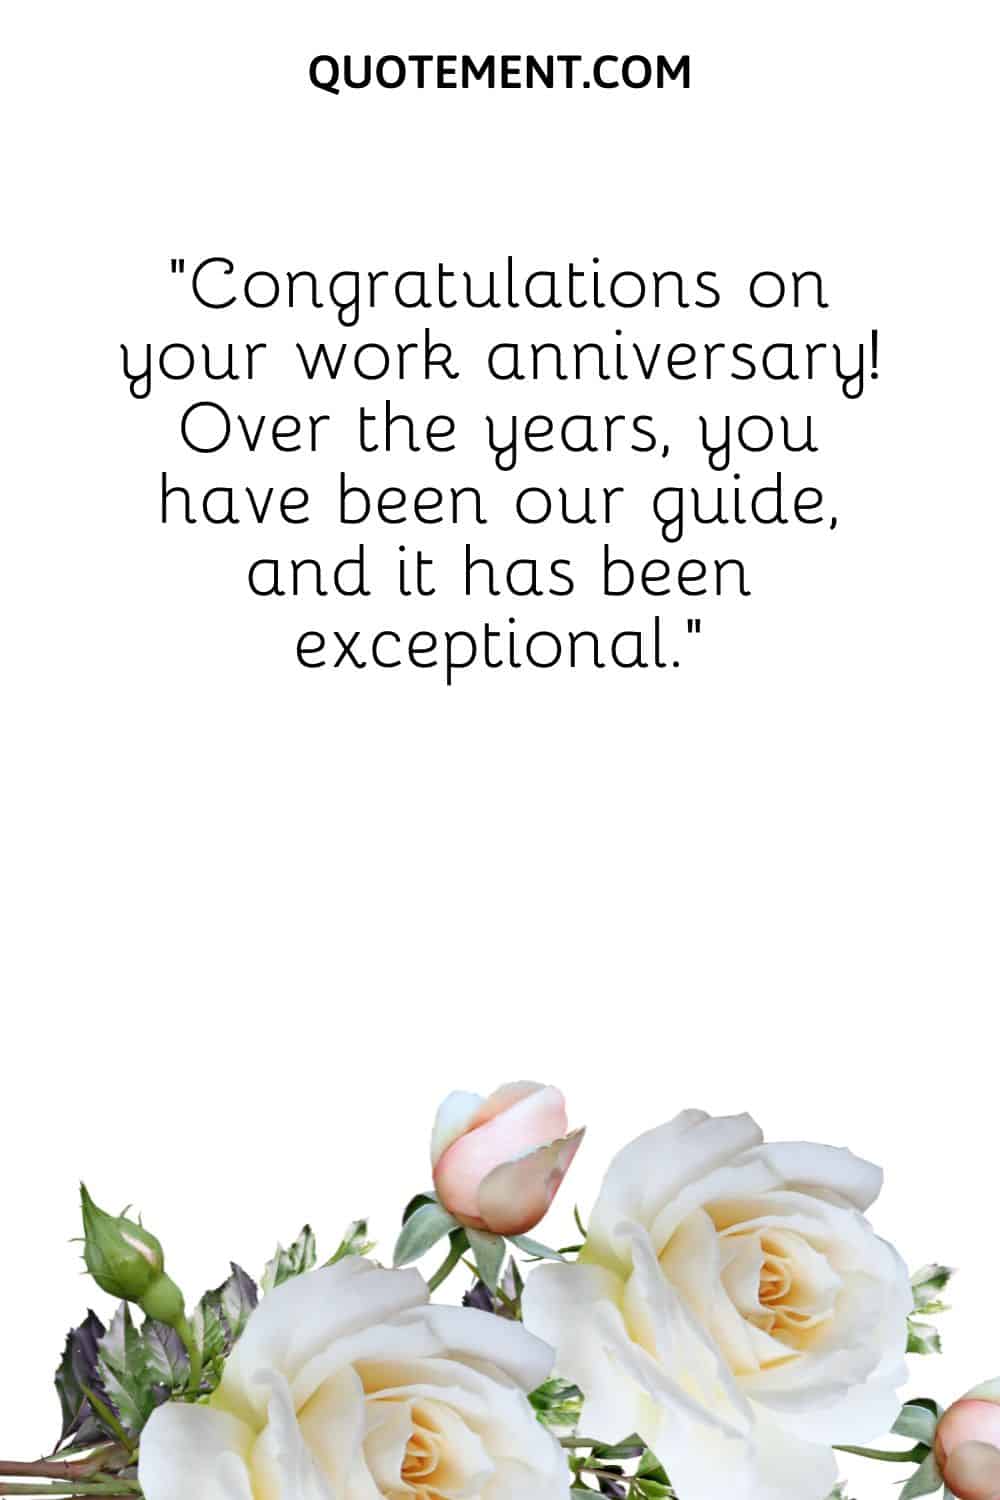 “Congratulations on your work anniversary! Over the years, you have been our guide, and it has been exceptional.”